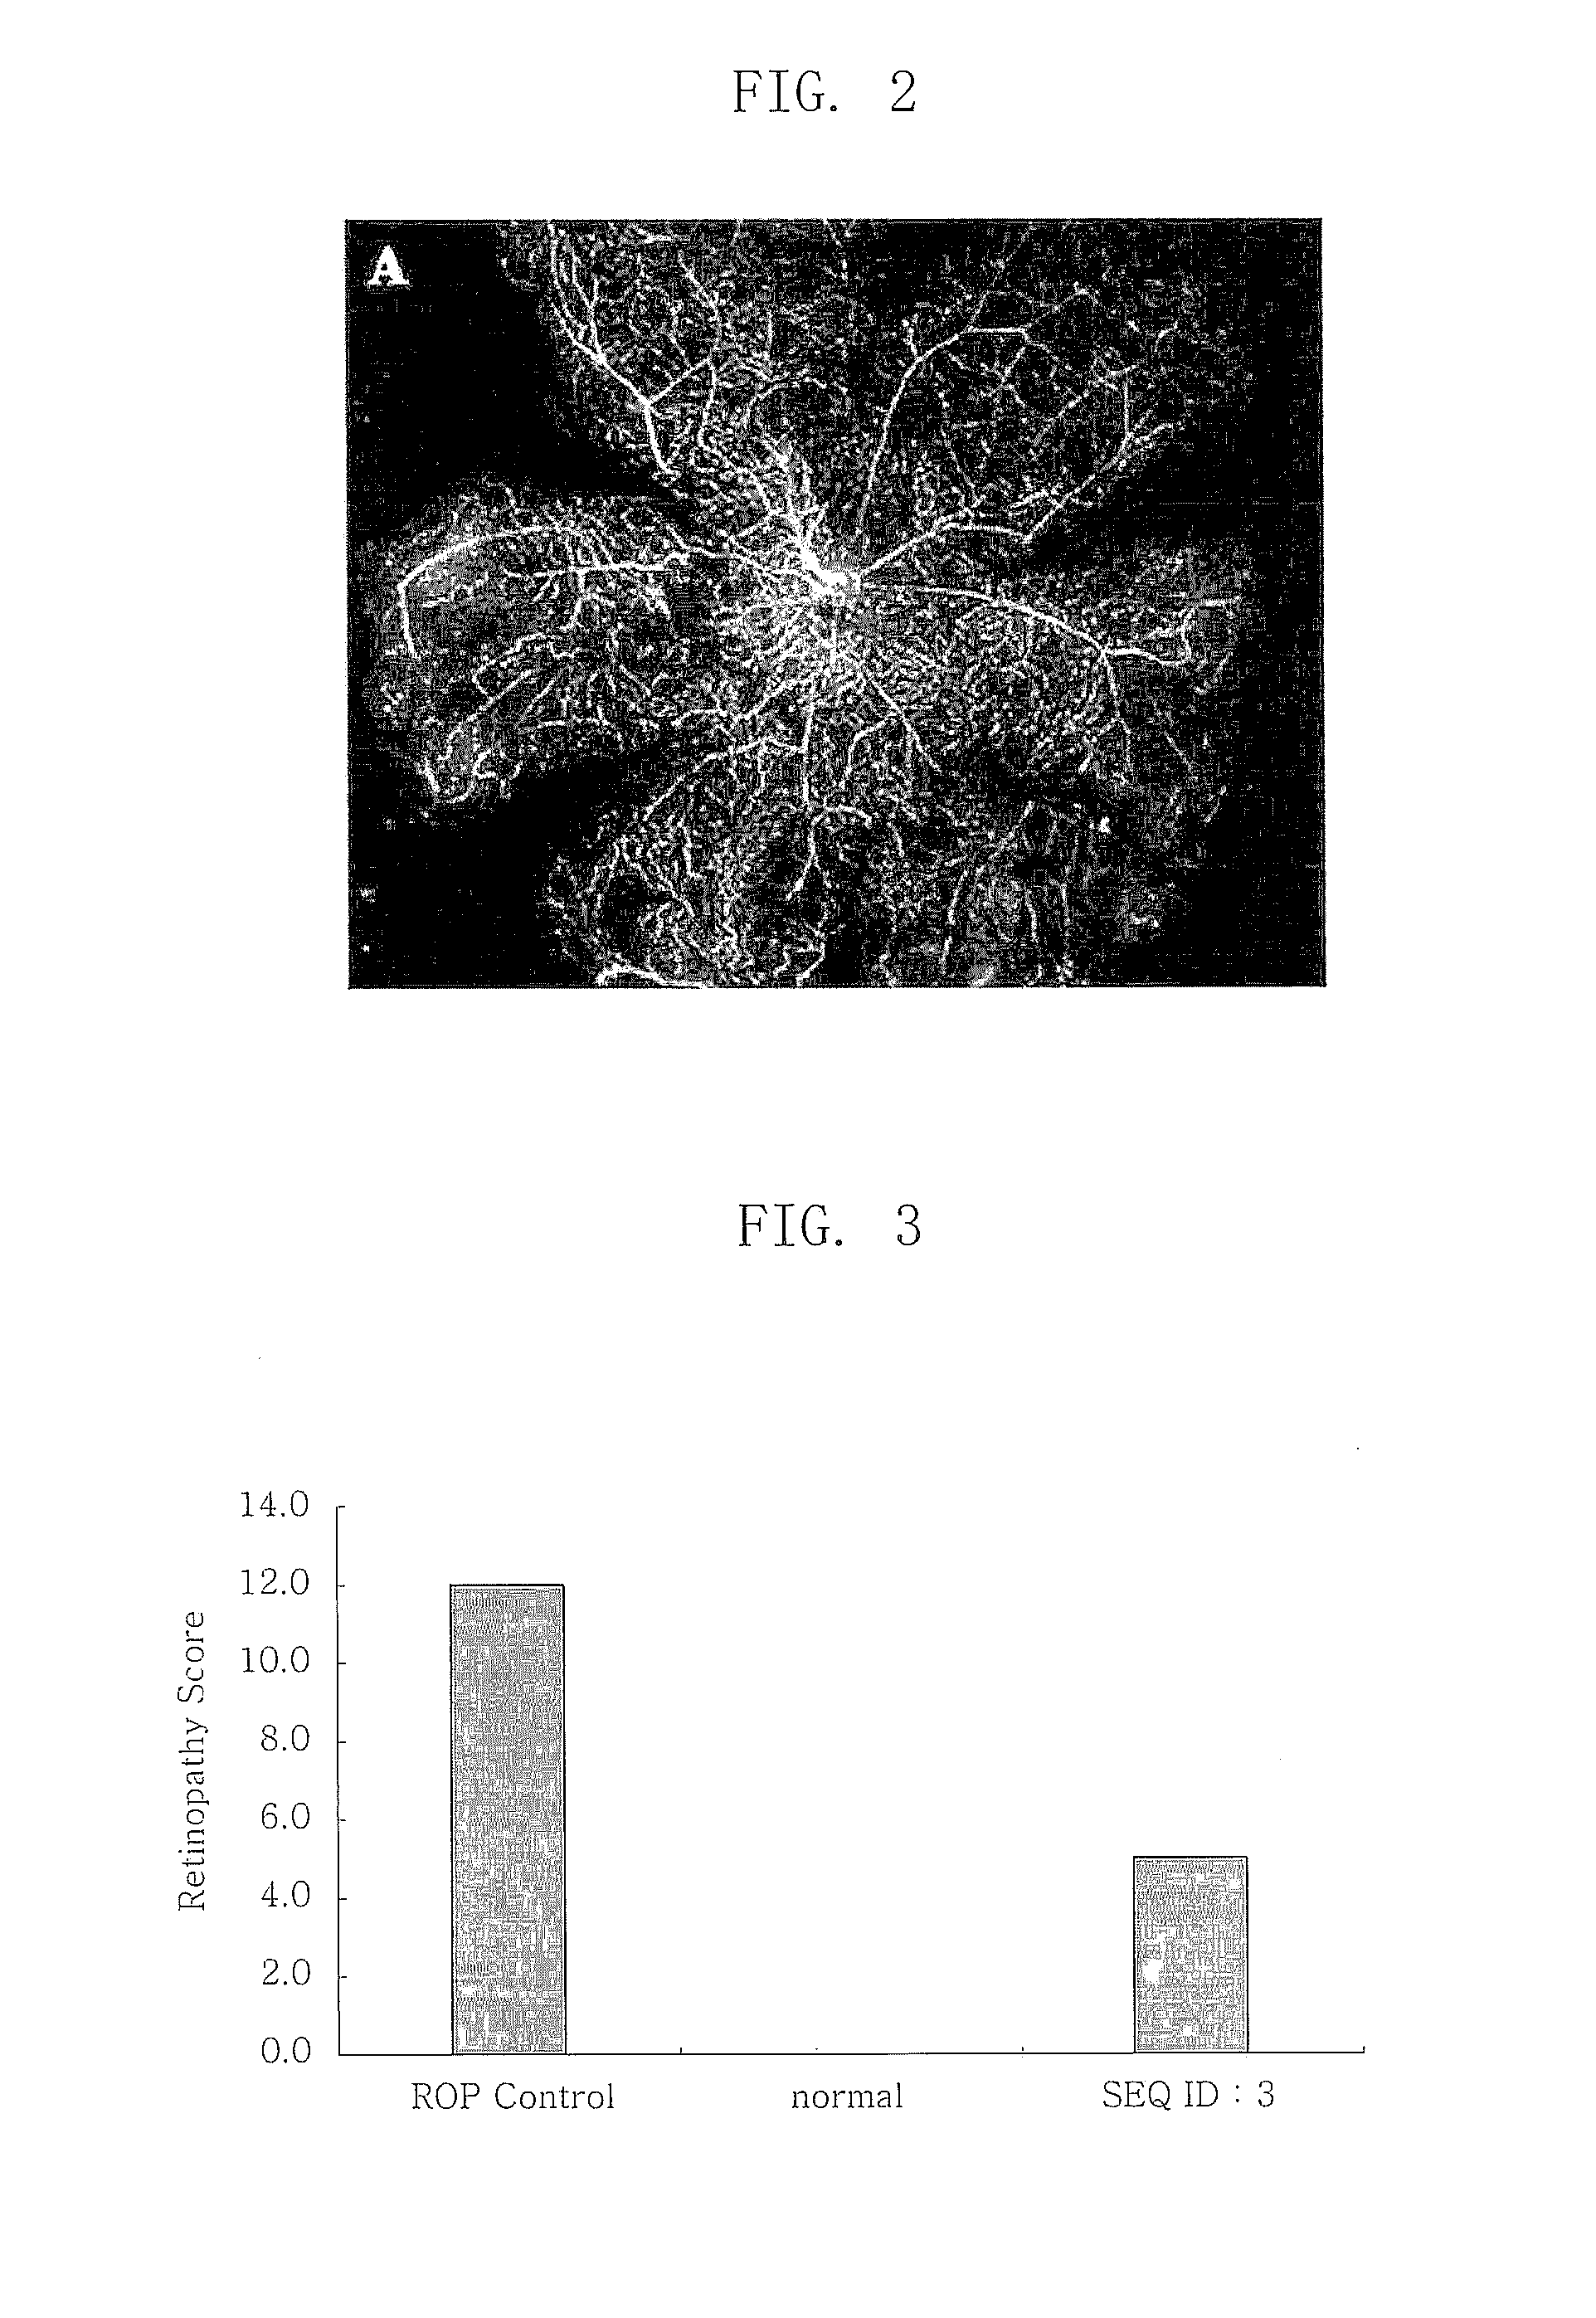 Composition for Treating Retinopathy or Glaucoma Comprising Thrombin Derived Peptides